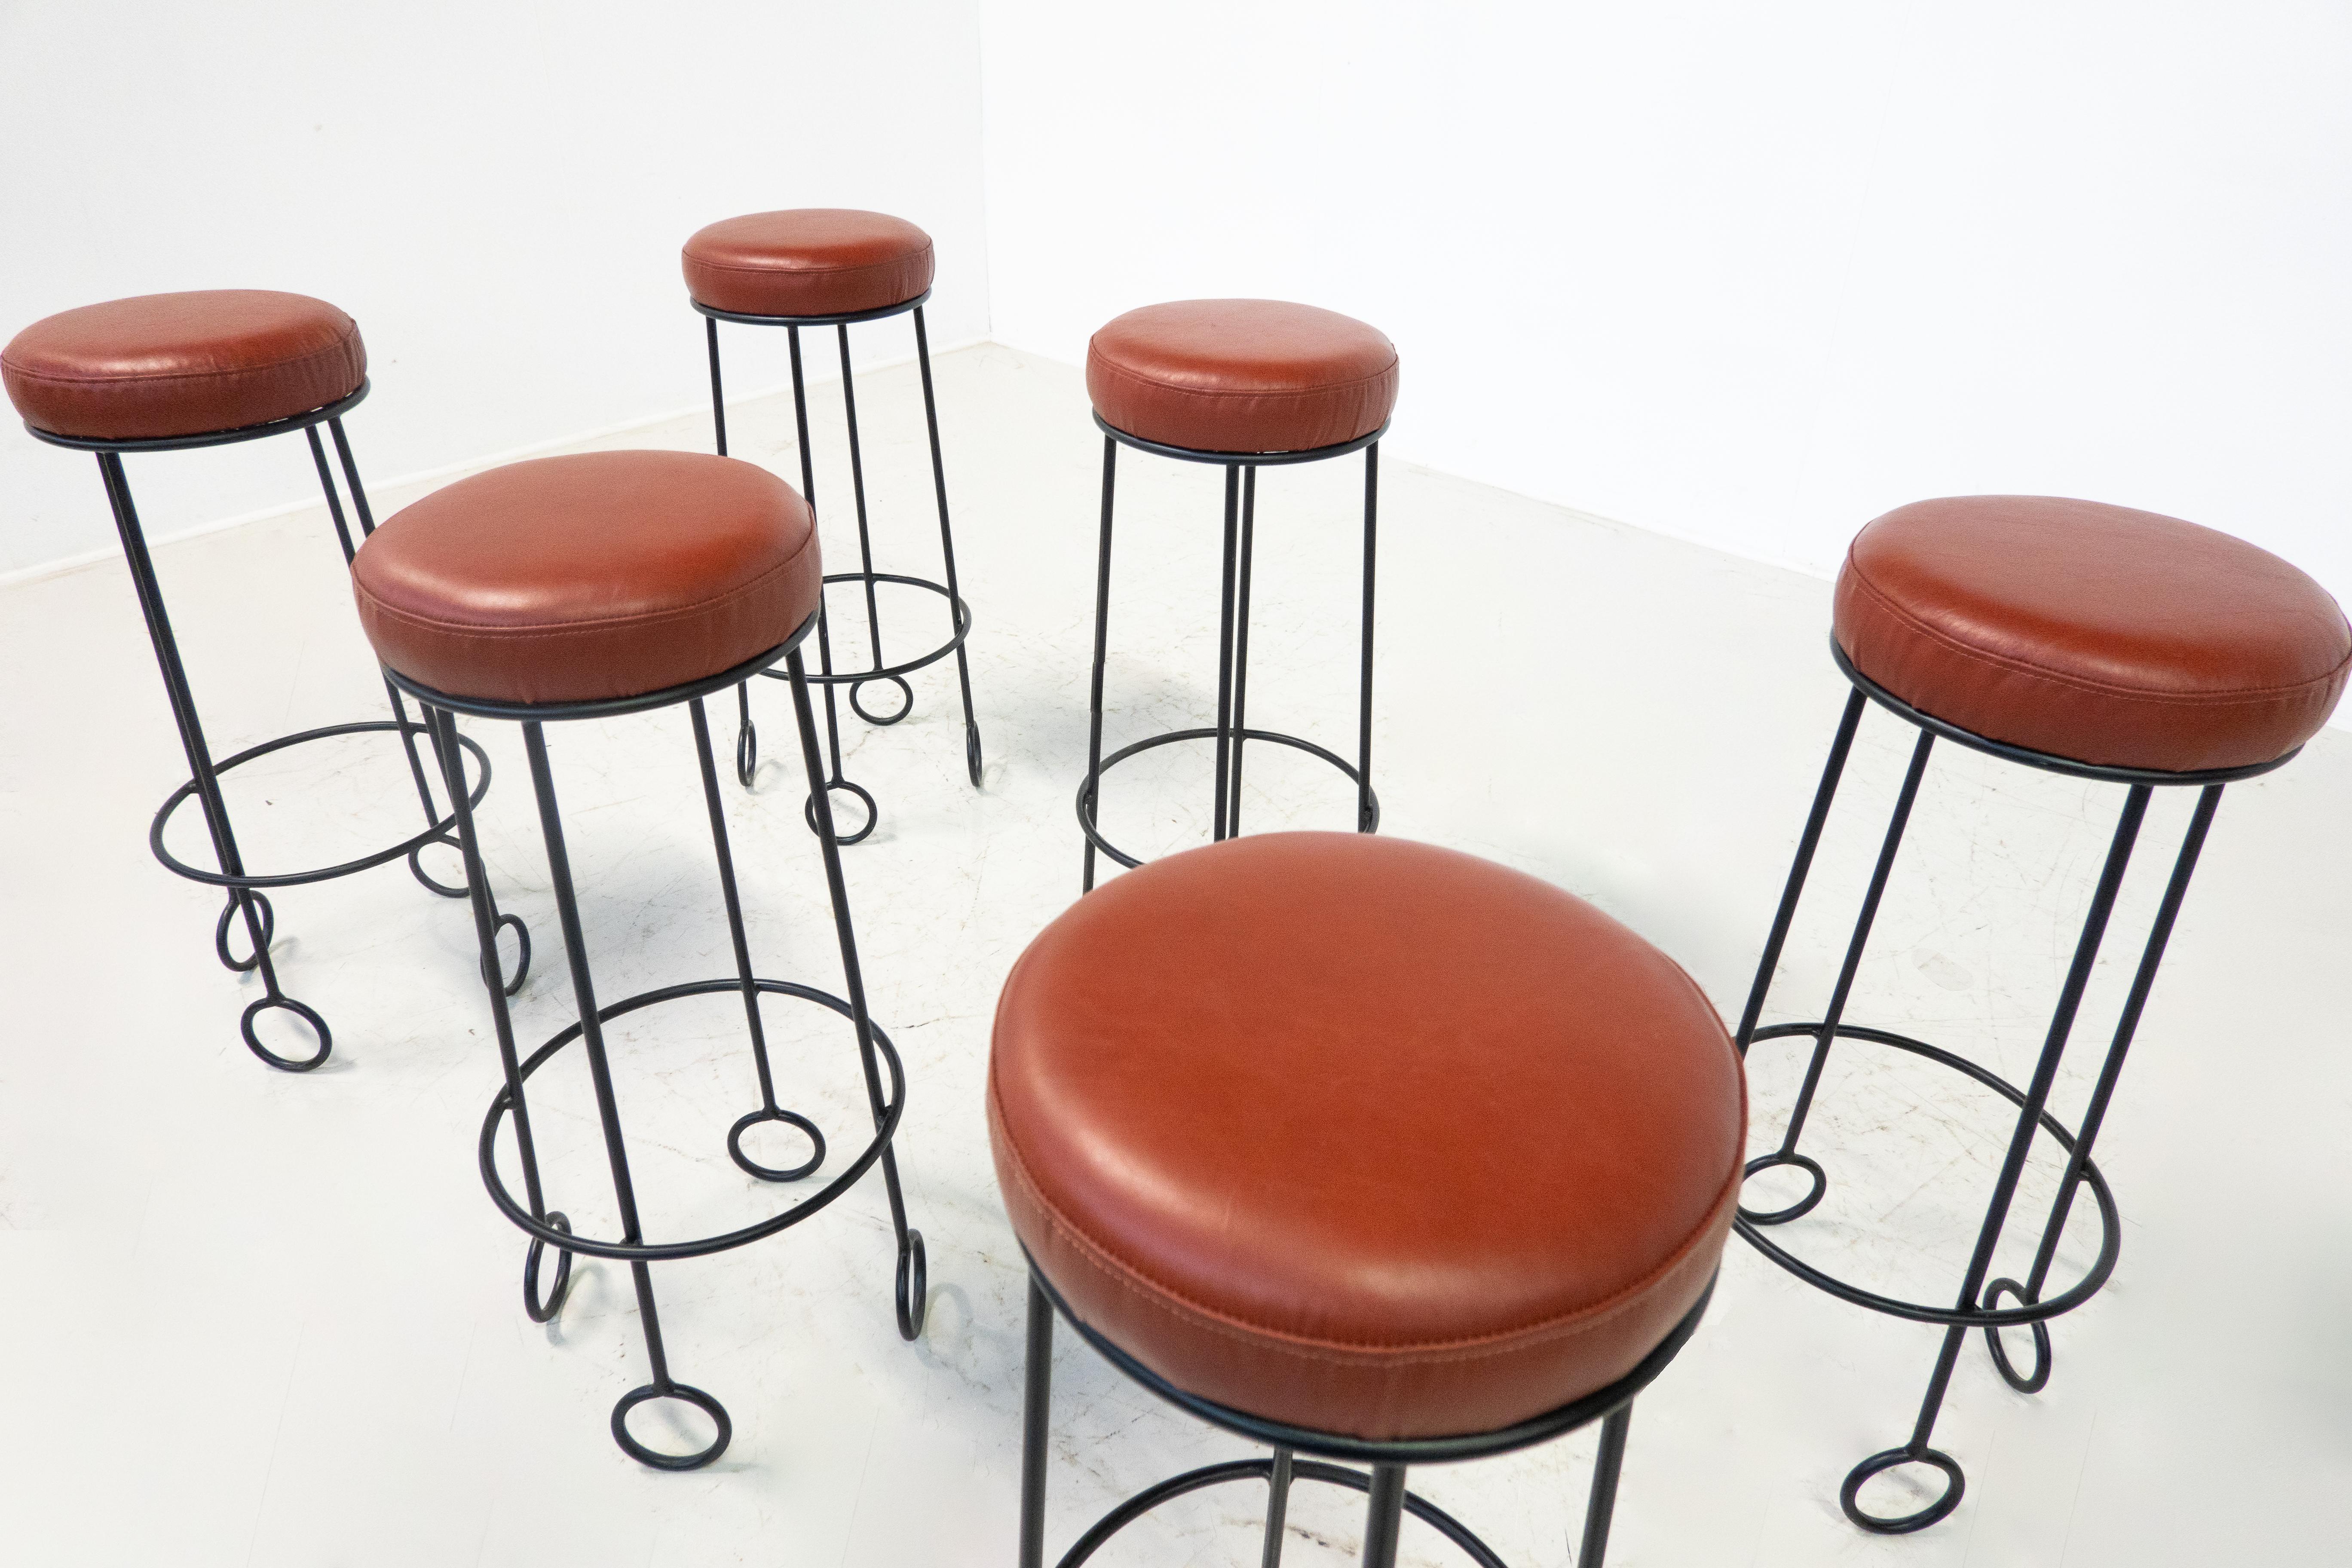 Mid-Century 'Quattro Sgabelli' Bar Stool in the style of Jean Royère, Iron and Leather, Italy, 1950s - Sold Individually